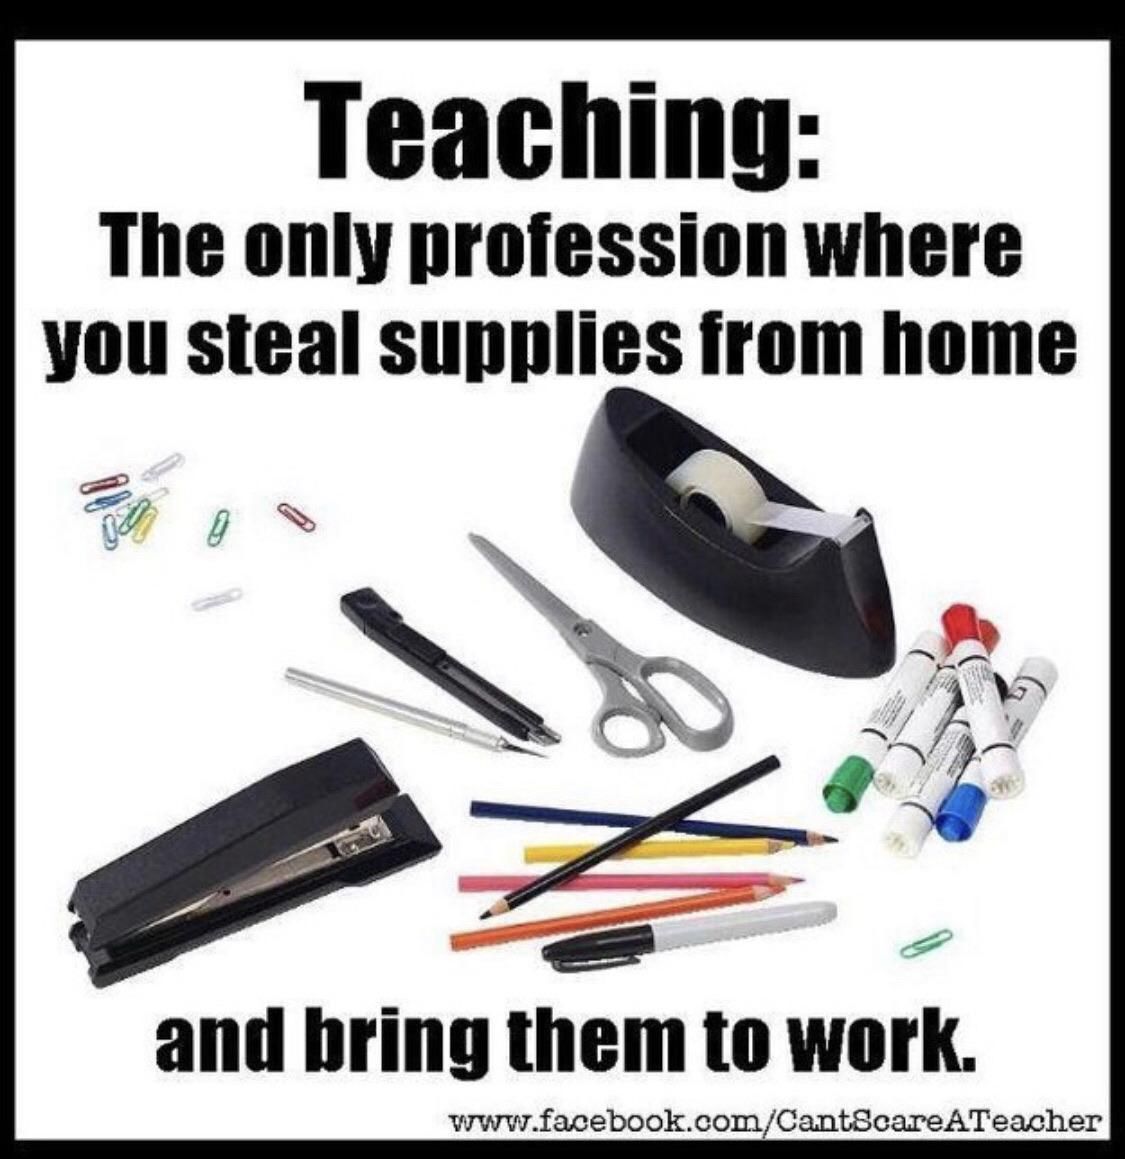 Teachers having to steal from home to supply the classroom.